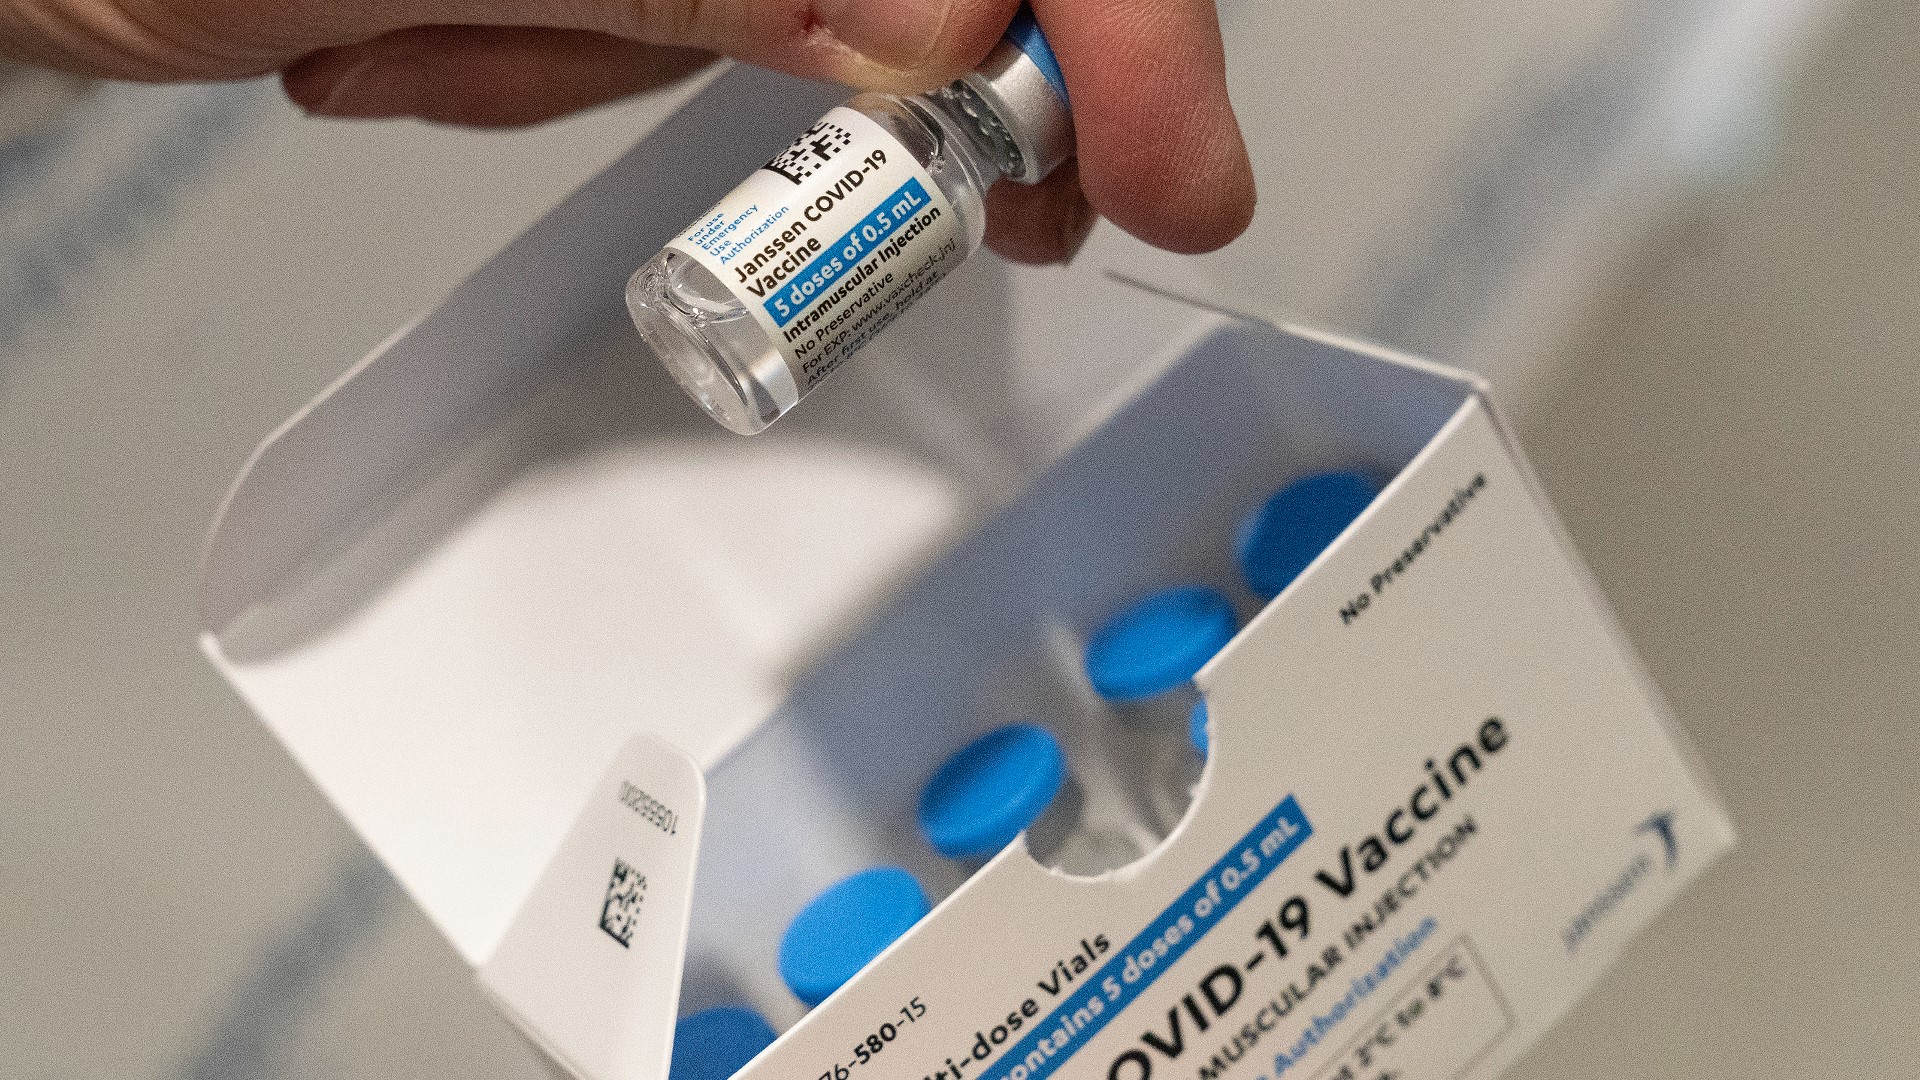 The FDA panel said the J&J booster should be offered at least two months after immunization but didn't suggest a firm time.